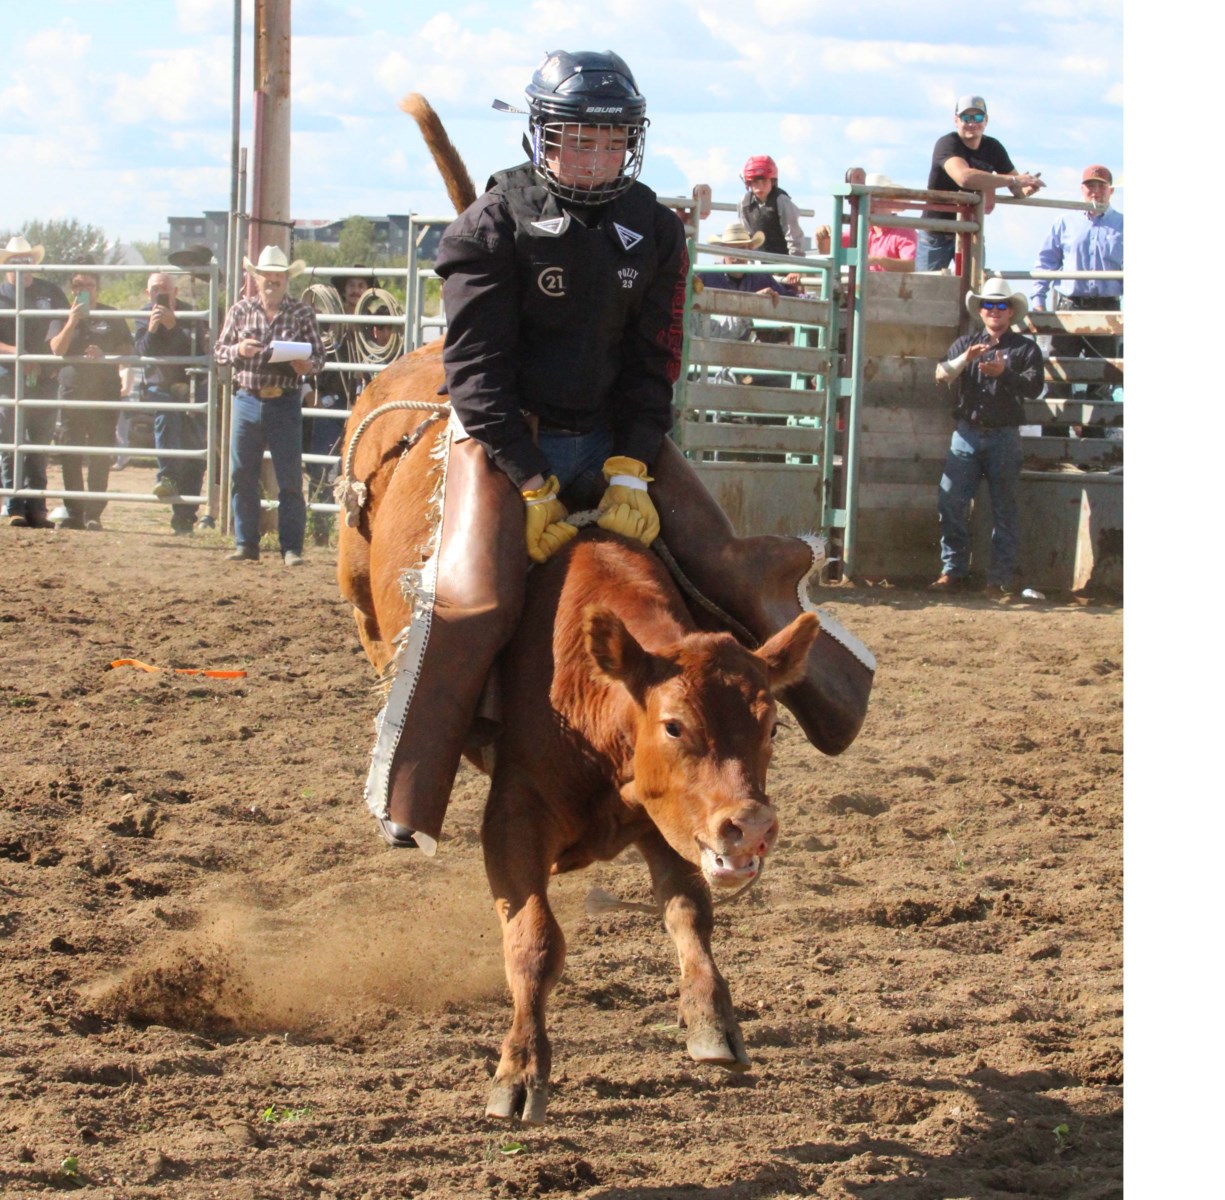 Lac La Biche teen cowboy geared up for upcoming rodeo season